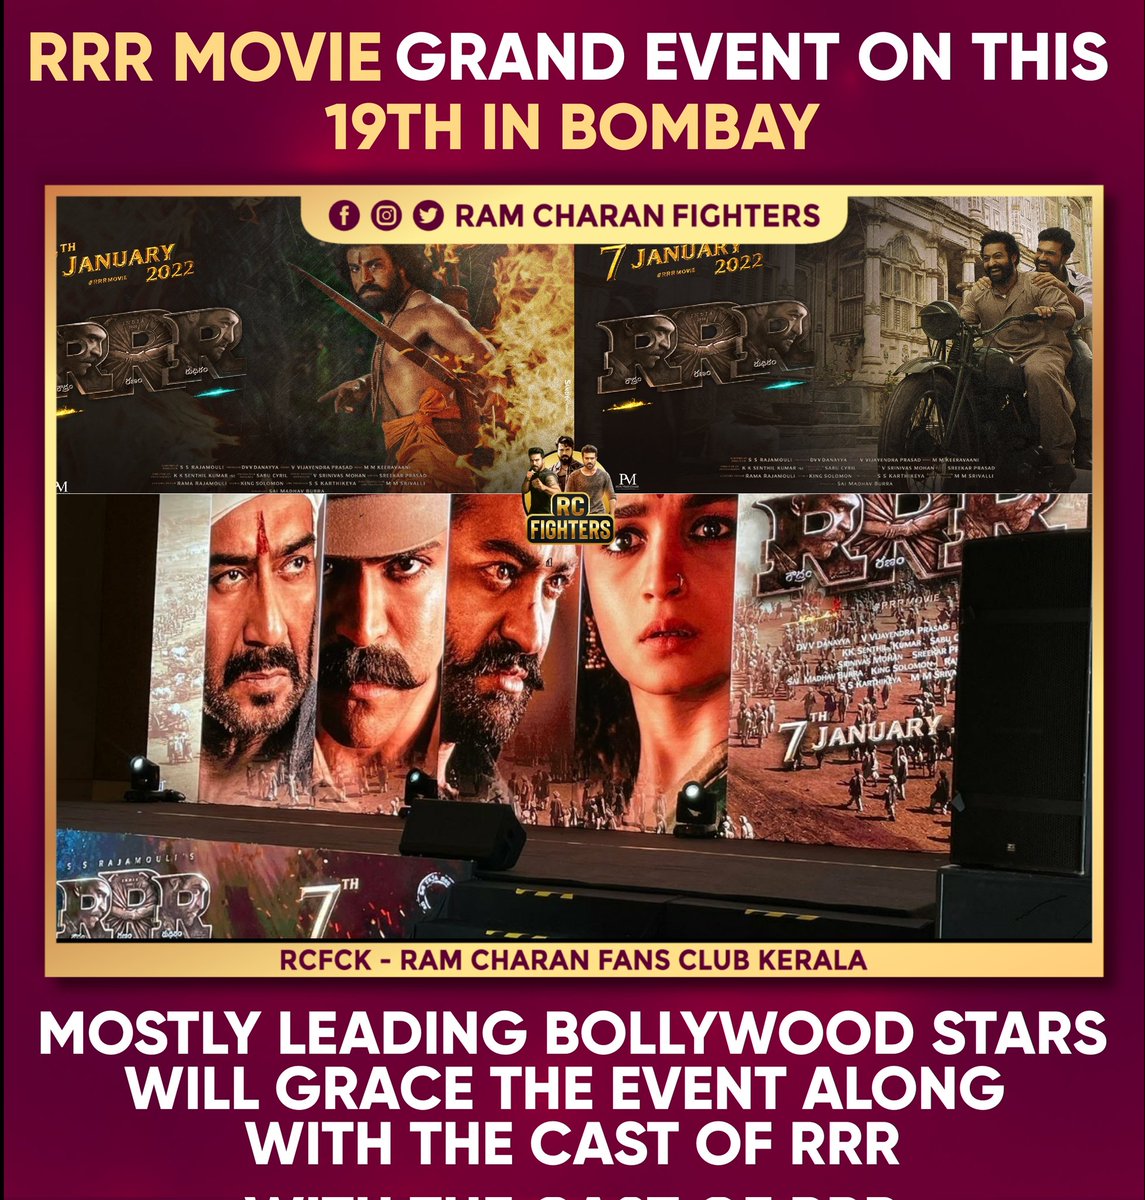 #RRRMovie Grand Event on this 19th in Bombay. Mostly Leading Bollywood Star will grace the Event along with the Cast of RRR #megapowerstar #ramcharan #jrntr #megastarchiranjeevi #rrrmovie #ramcharanfans #RCFCK #rcfck_official #cboe_official #rc16 #RamCharanFansKerala